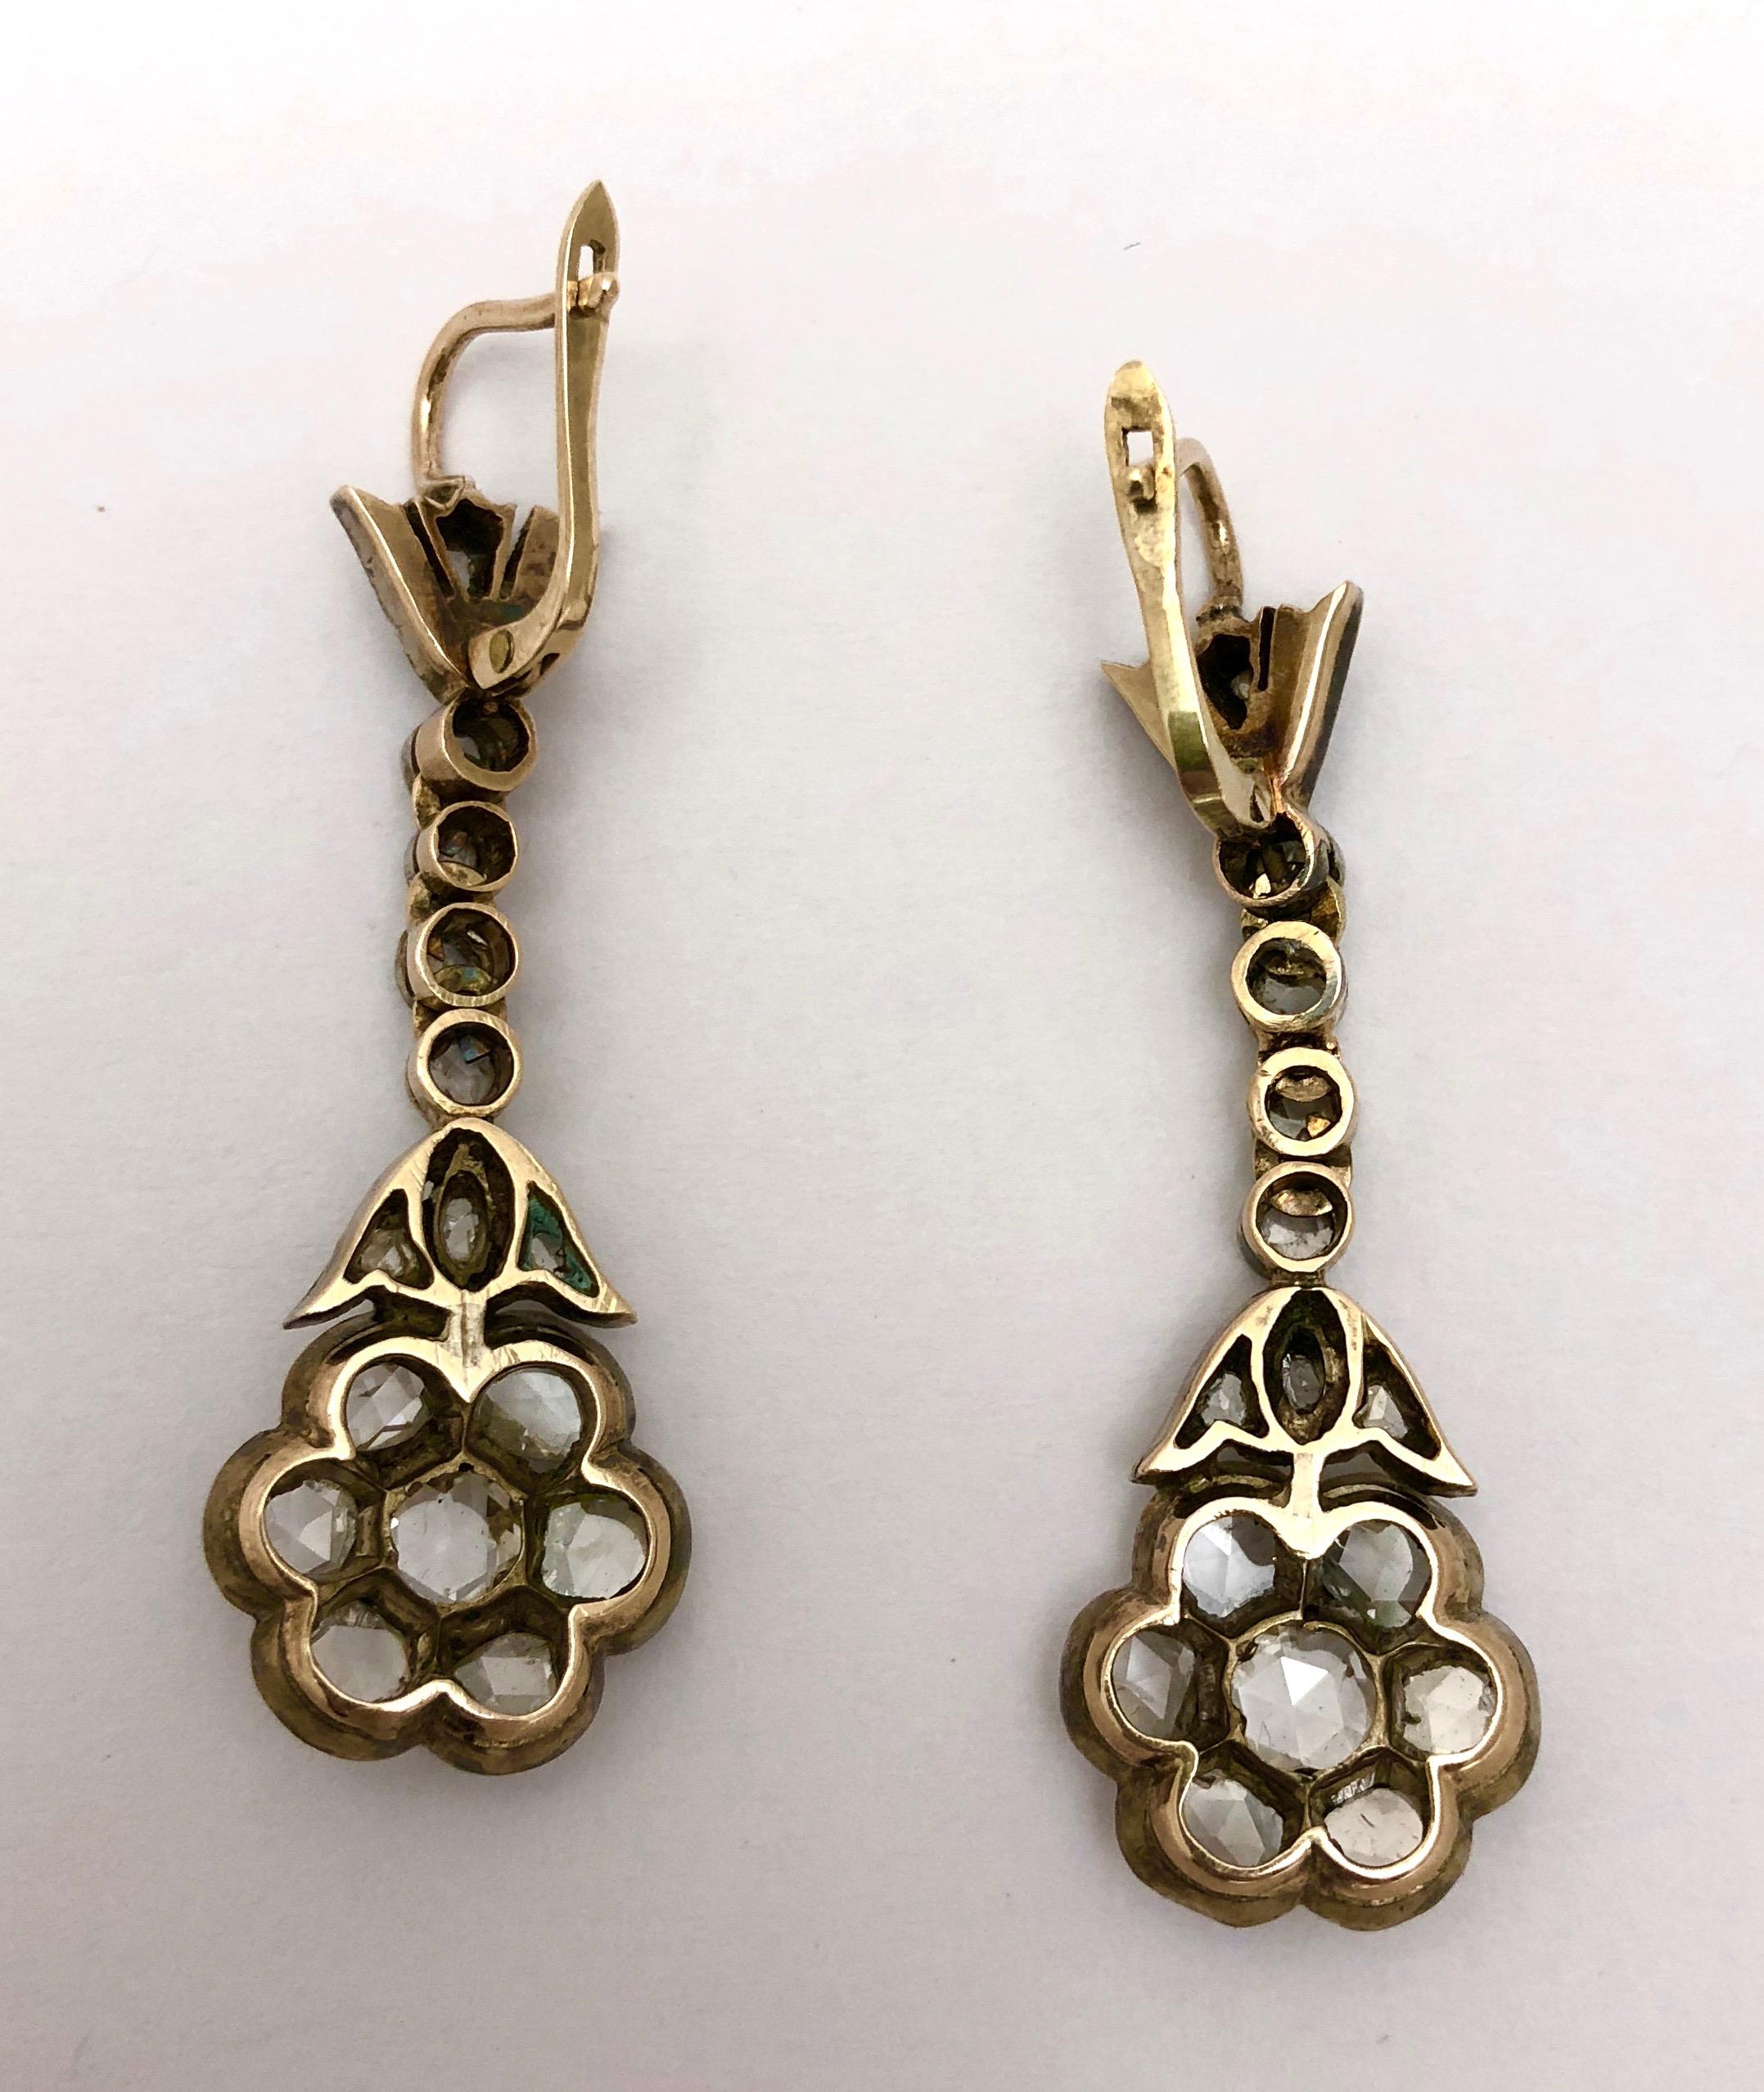 4.25ct Diamond Period Edwardian Earrings For Sale at 1stDibs